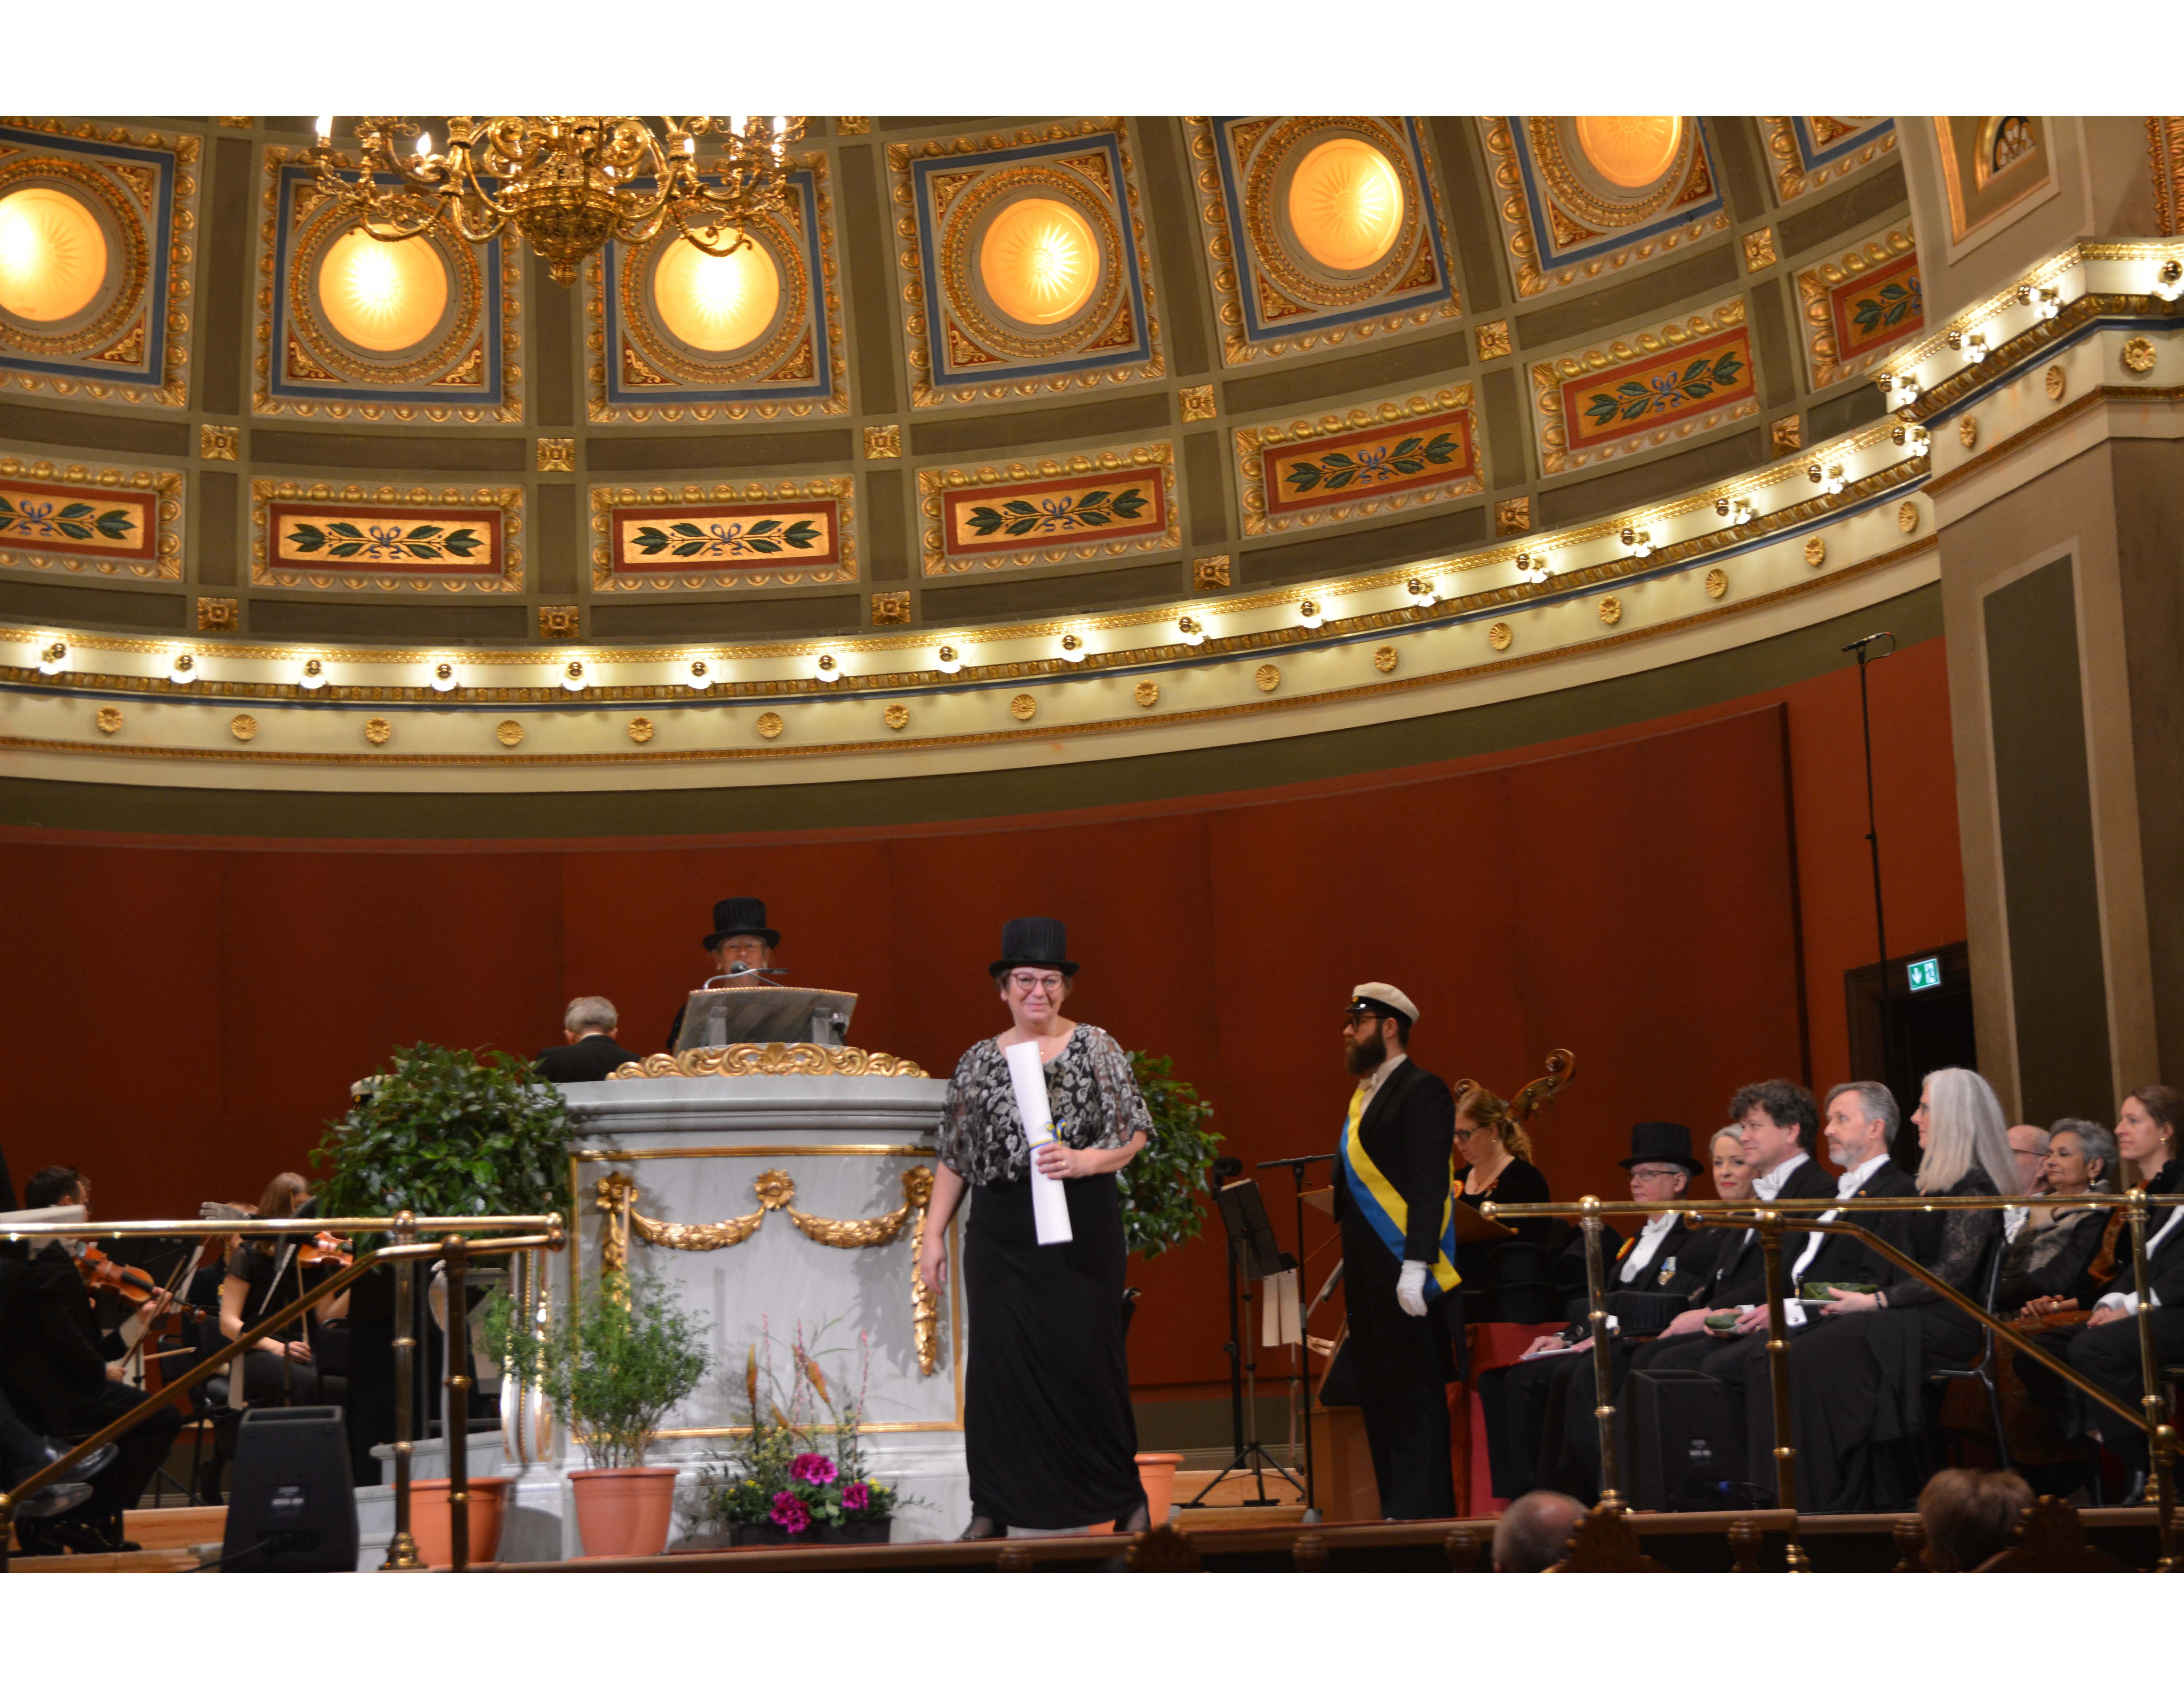 Hille Haker accepts her honorary doctoral degree, hat, and ring on stage at the ceremony at Uppsala University